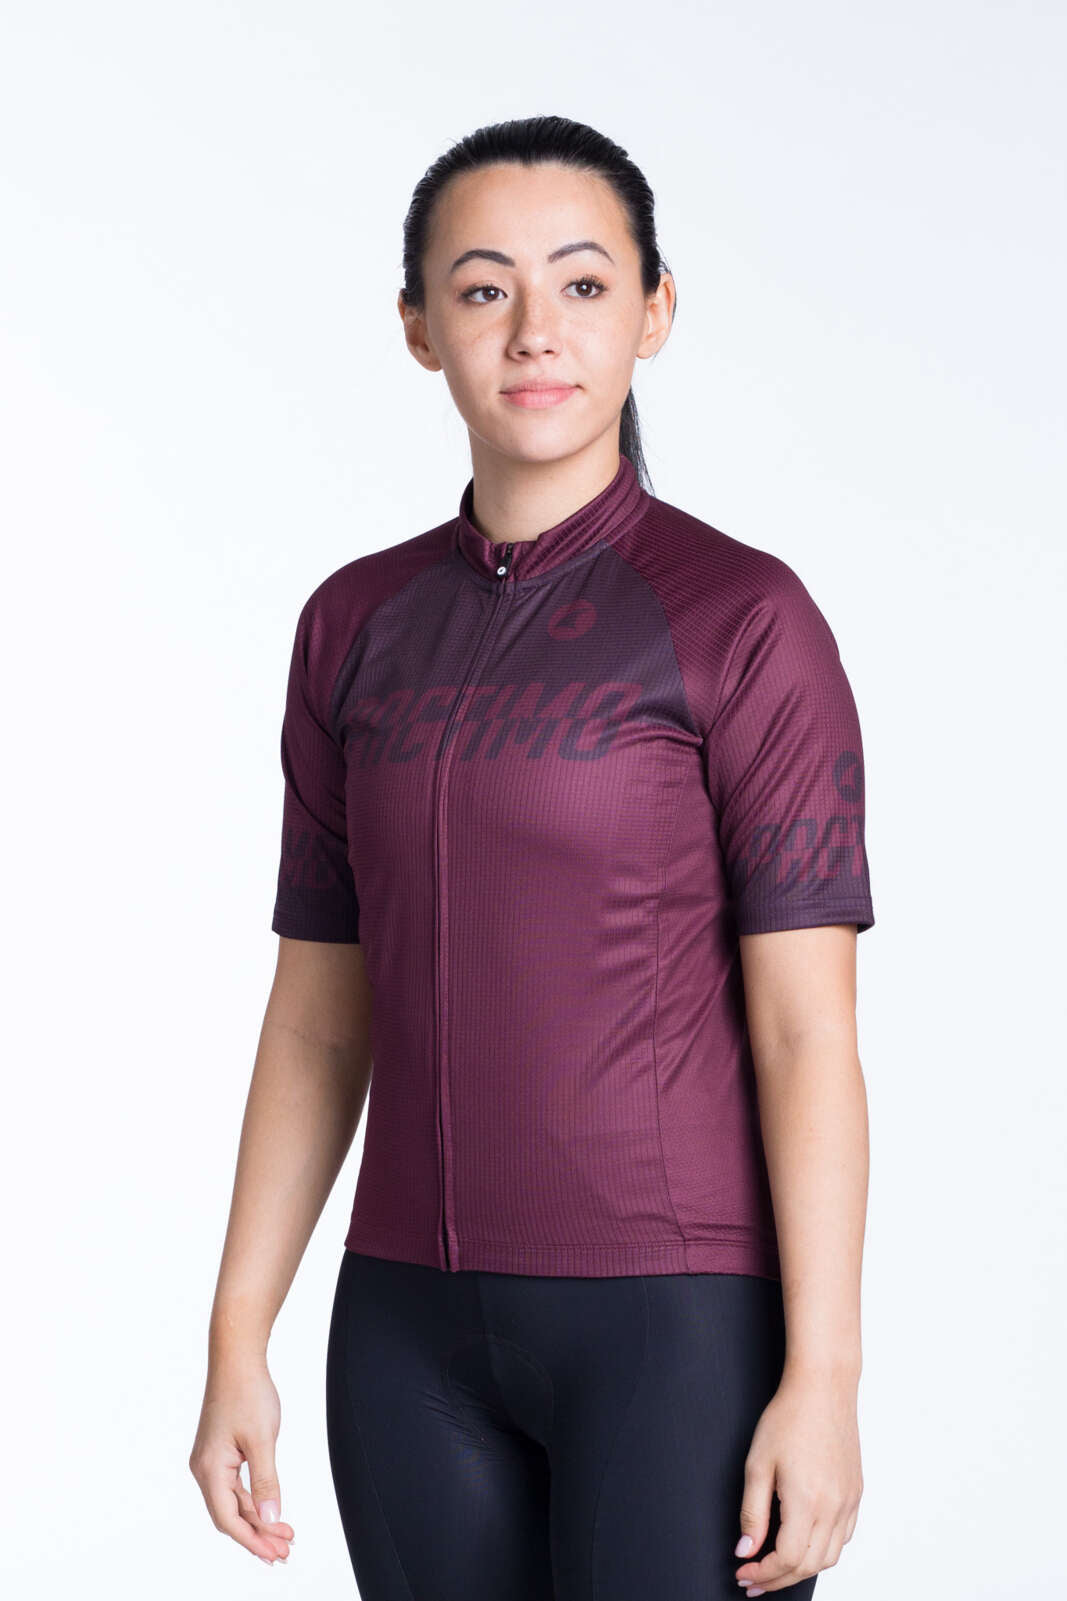 Women's Burgundy Loose Fit Cycling Jersey - Front View